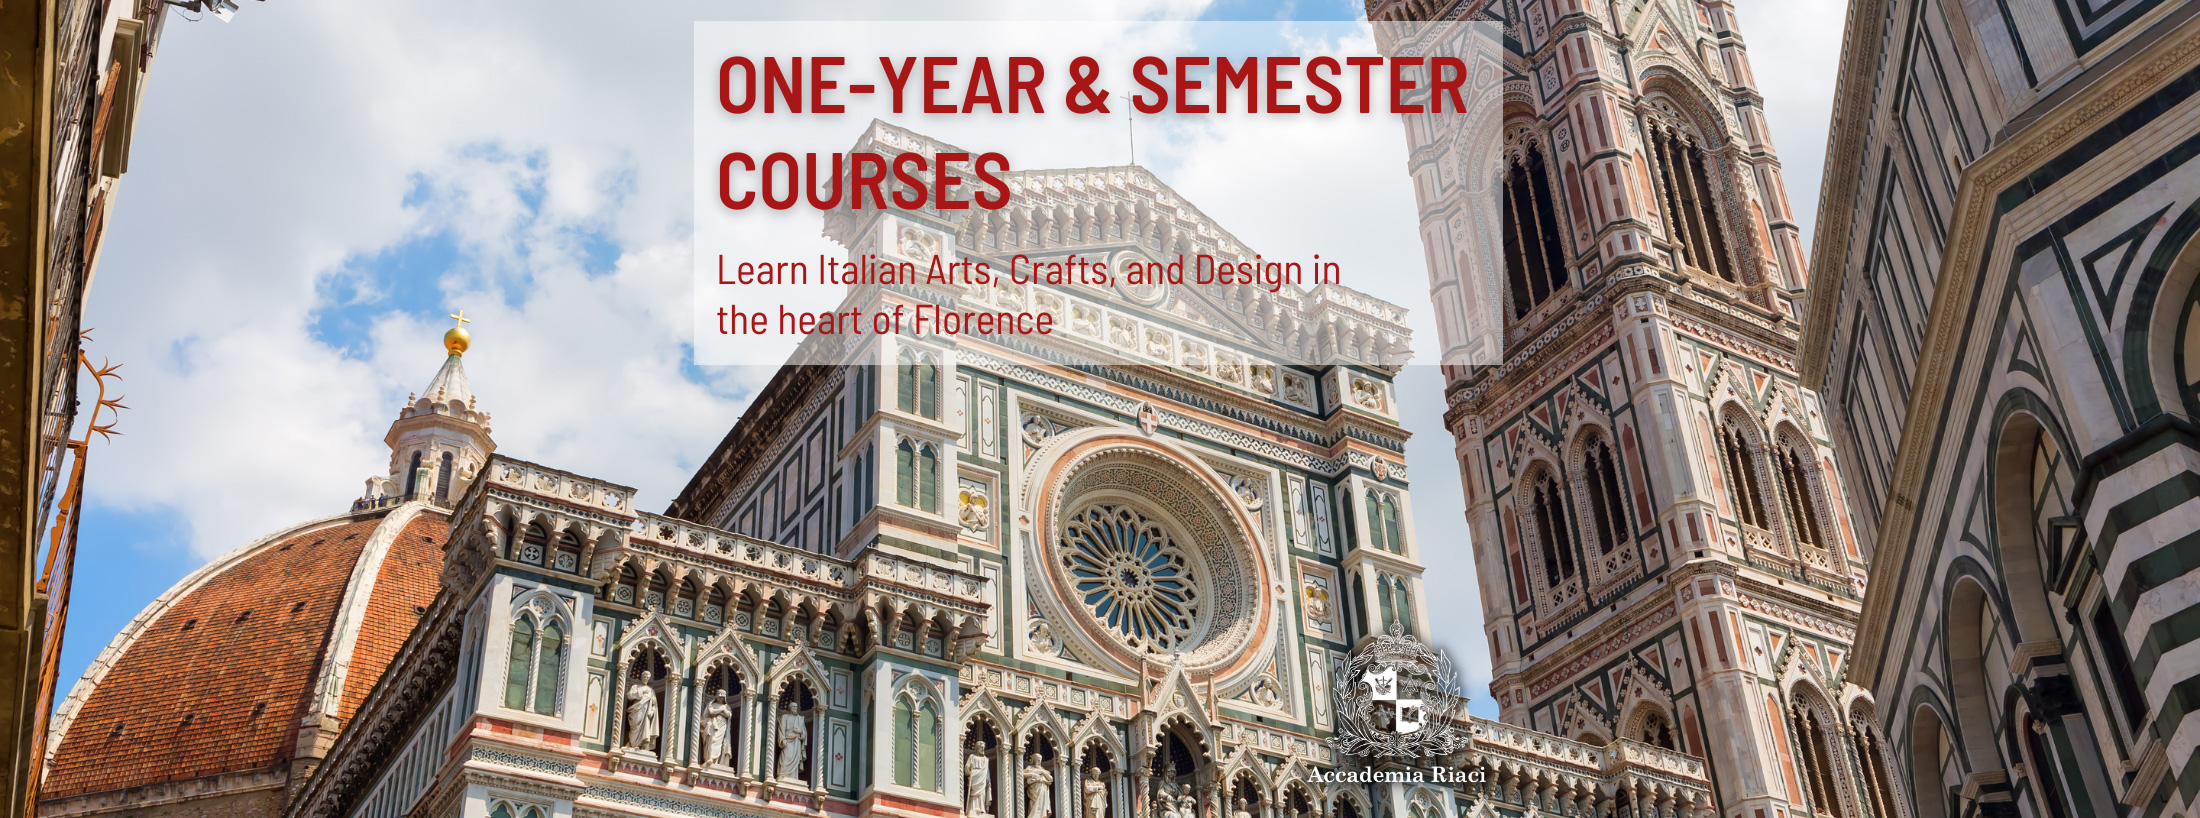 Accademia Riaci - Learn Italian Art, Design in the Heart of Florence, Italy